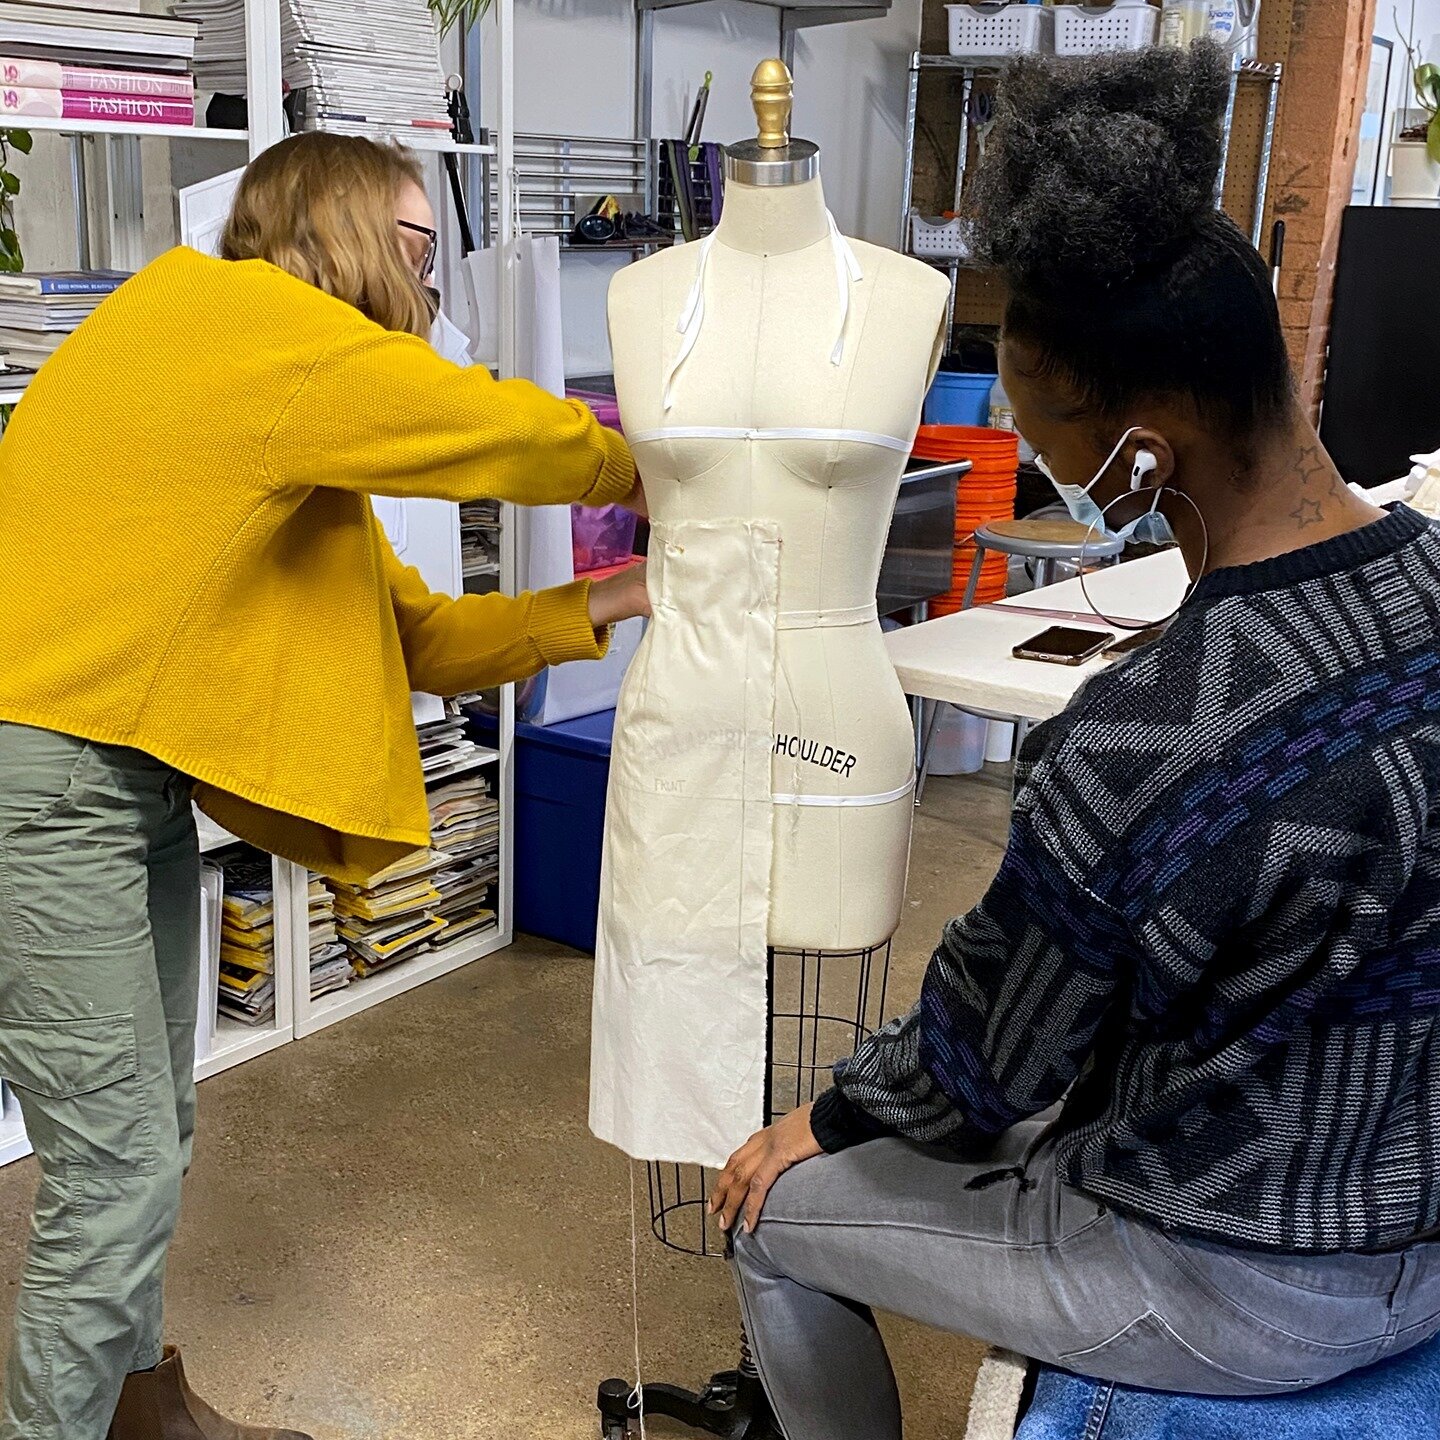 Seeing your work in 3D is a whole new experience!⁠
@bryant.hailey is instructing Dymesha, @legendarylegz how to drape a skirt on the dress form.⁠
⁠
Try you hand at Draping with our studio classes in our Philadelphia atelier. ⁠
Next offering:⁠
January